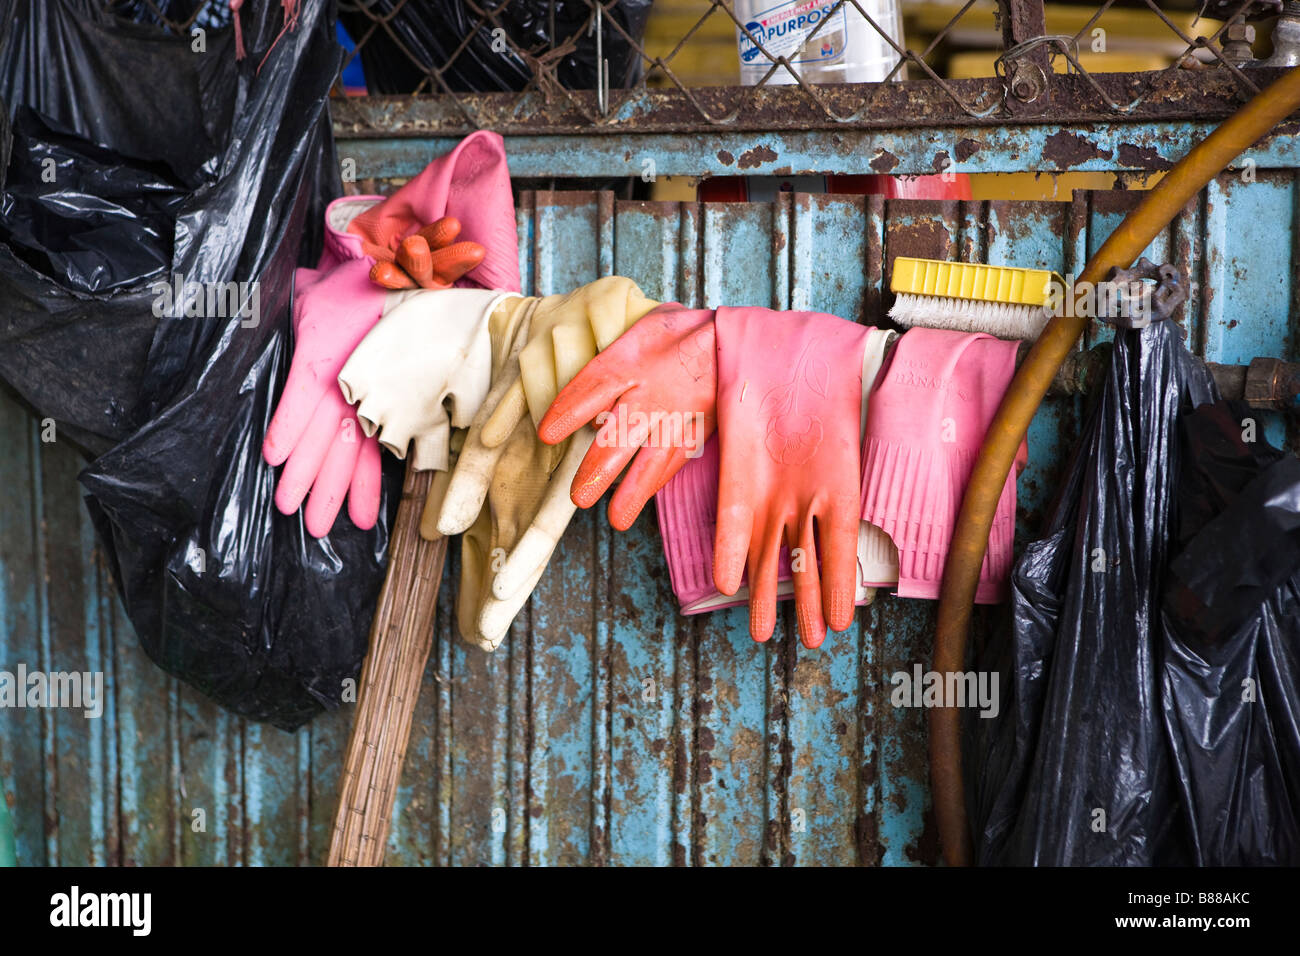 rubber gloves and trash bags Stock Photo